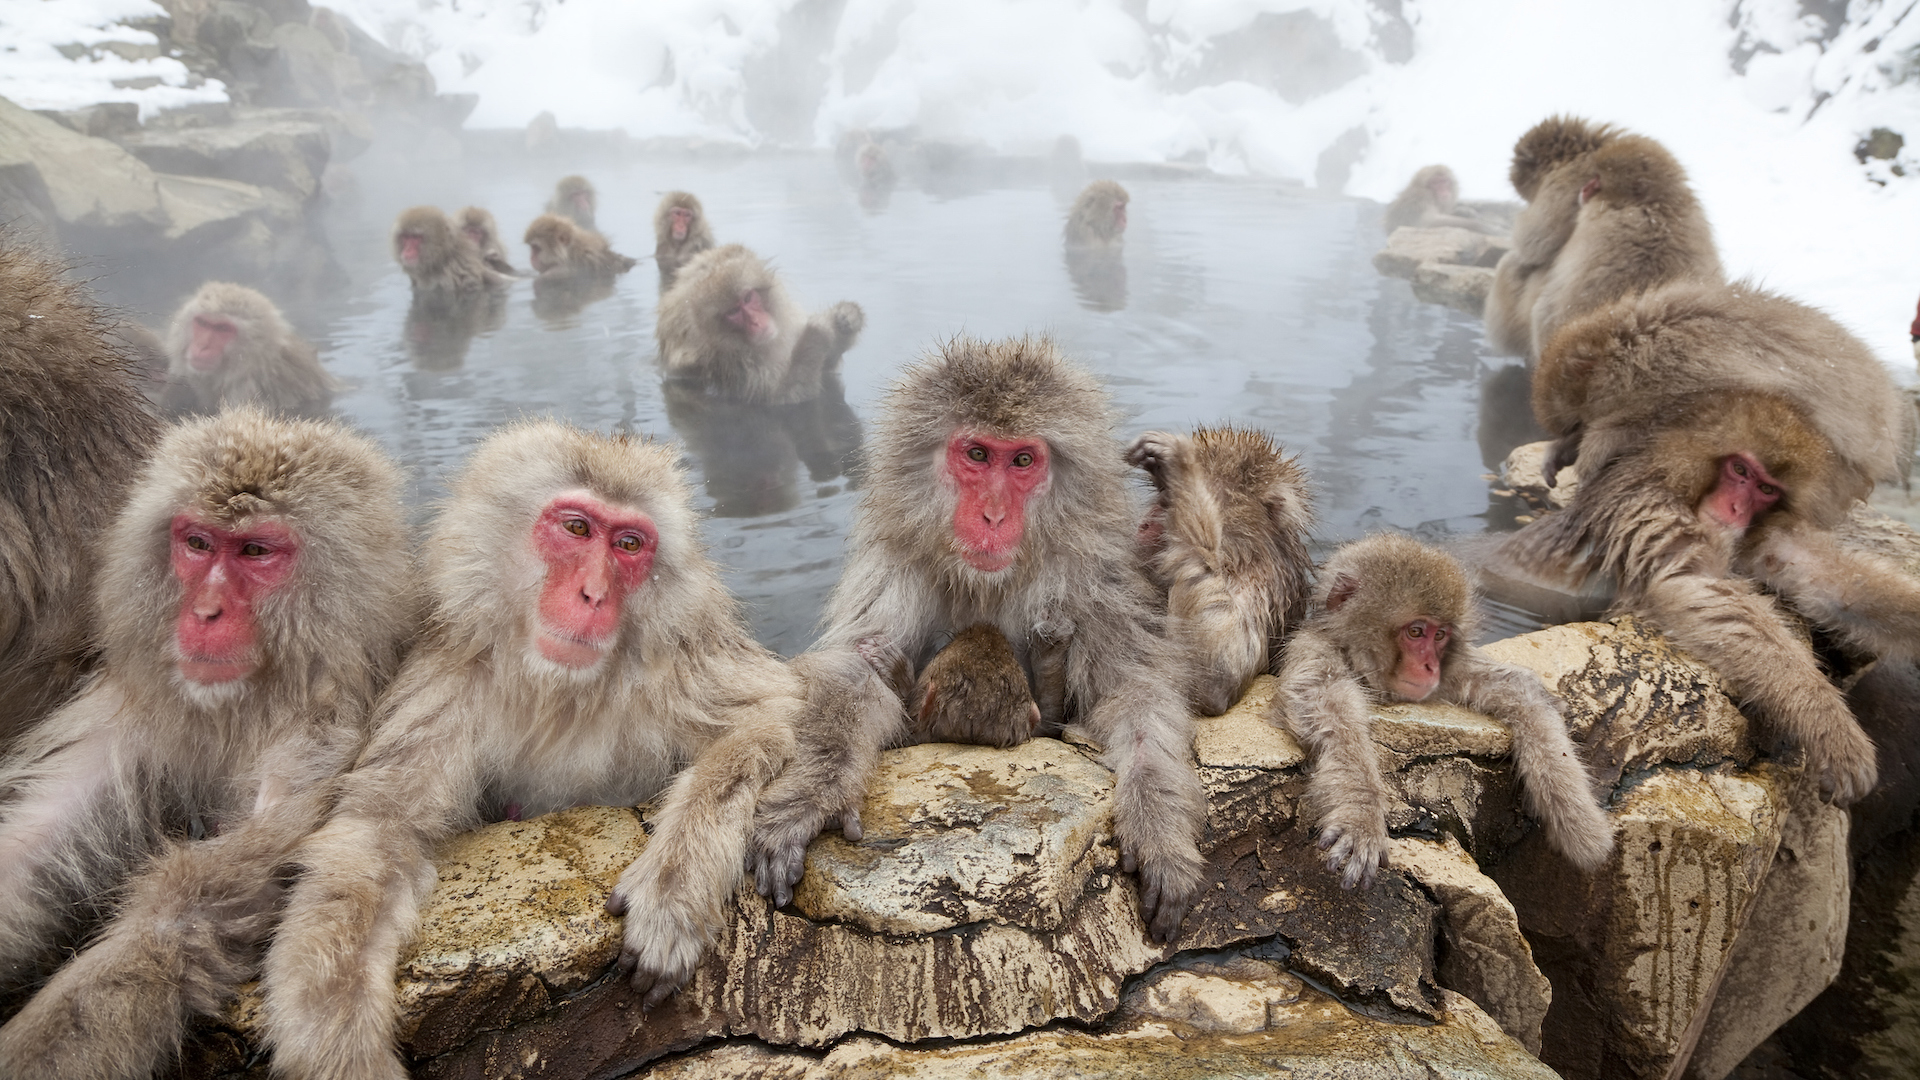 A photograph of Japanese macaques in a hot spring in the winter